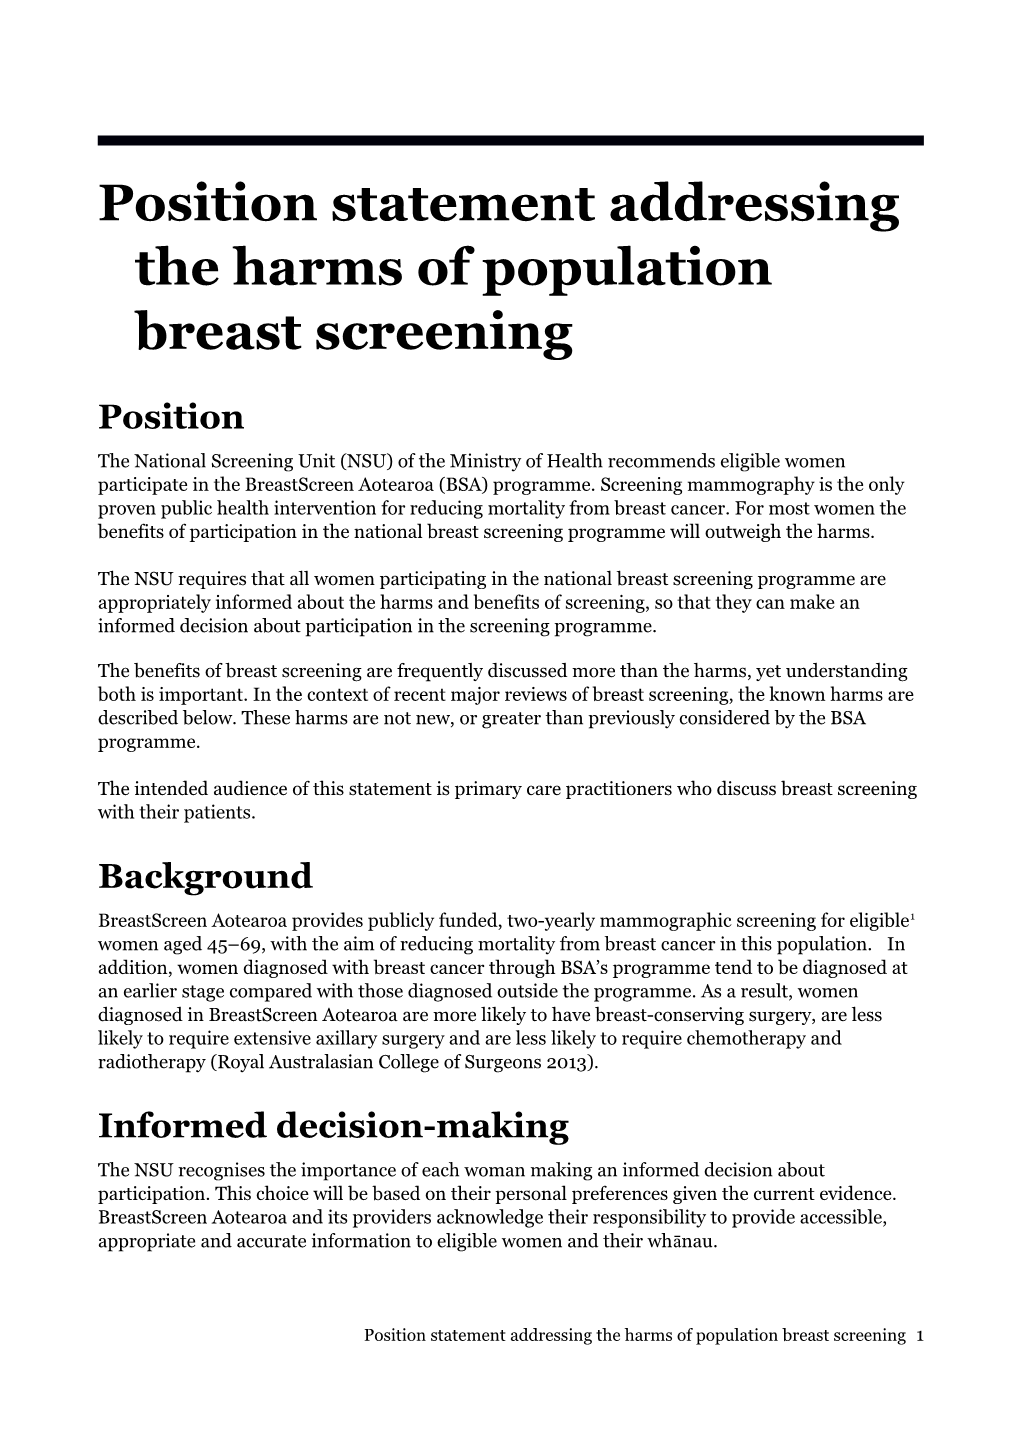 Position Statement Addressing the Harms of Population Breast Screening